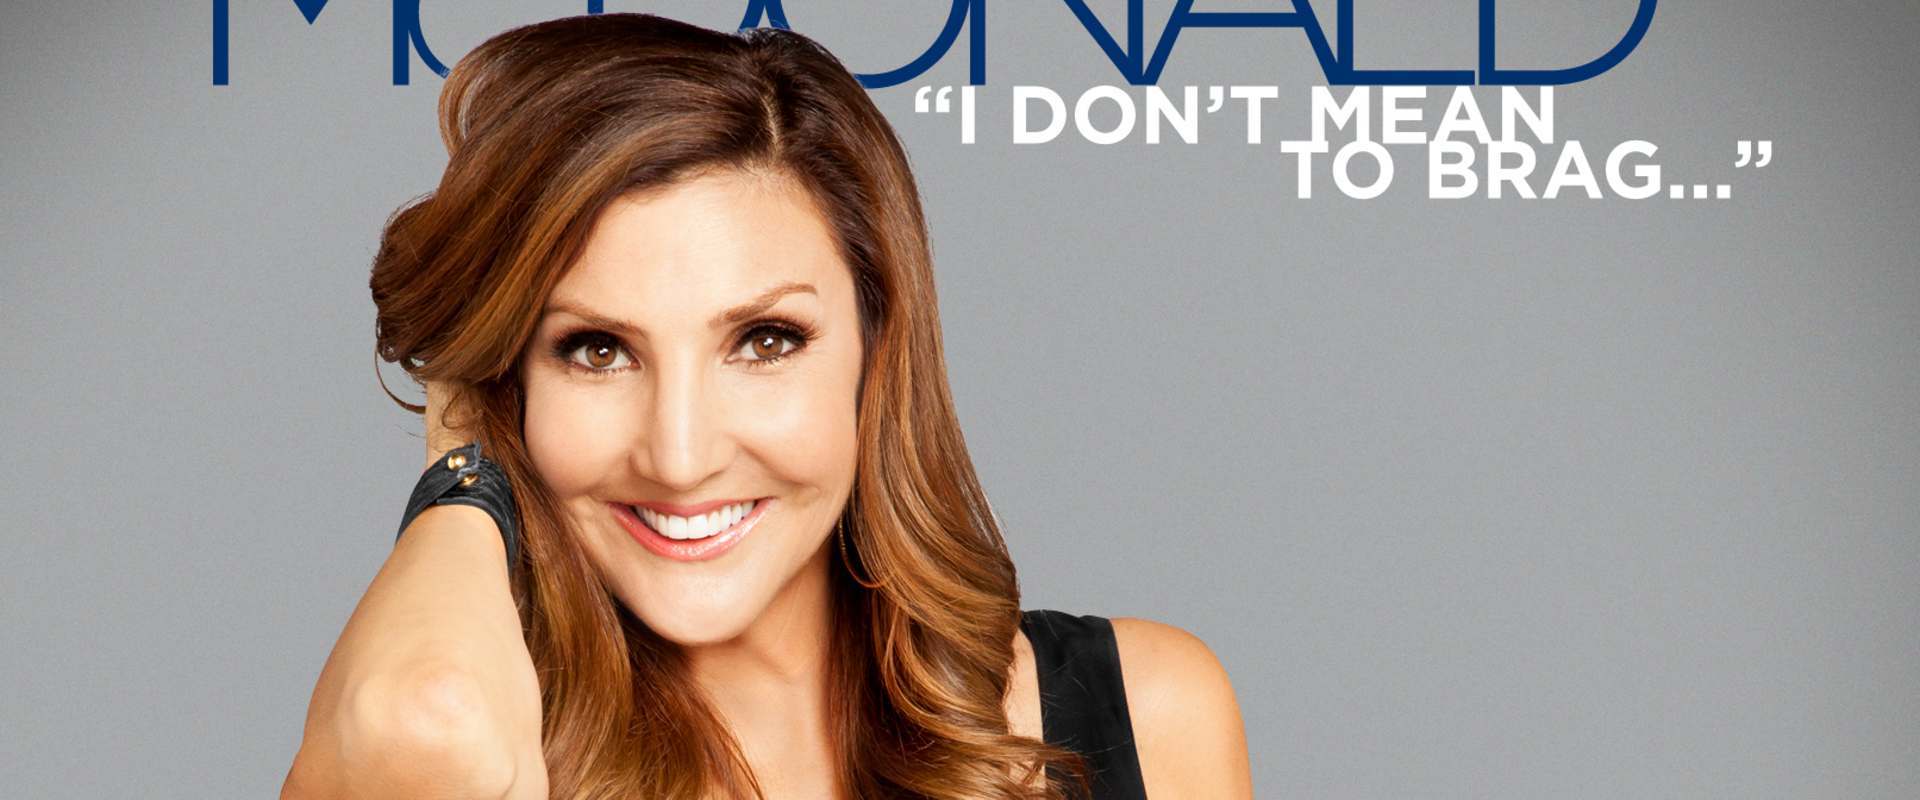 Heather McDonald: I Don't Mean to Brag background 1